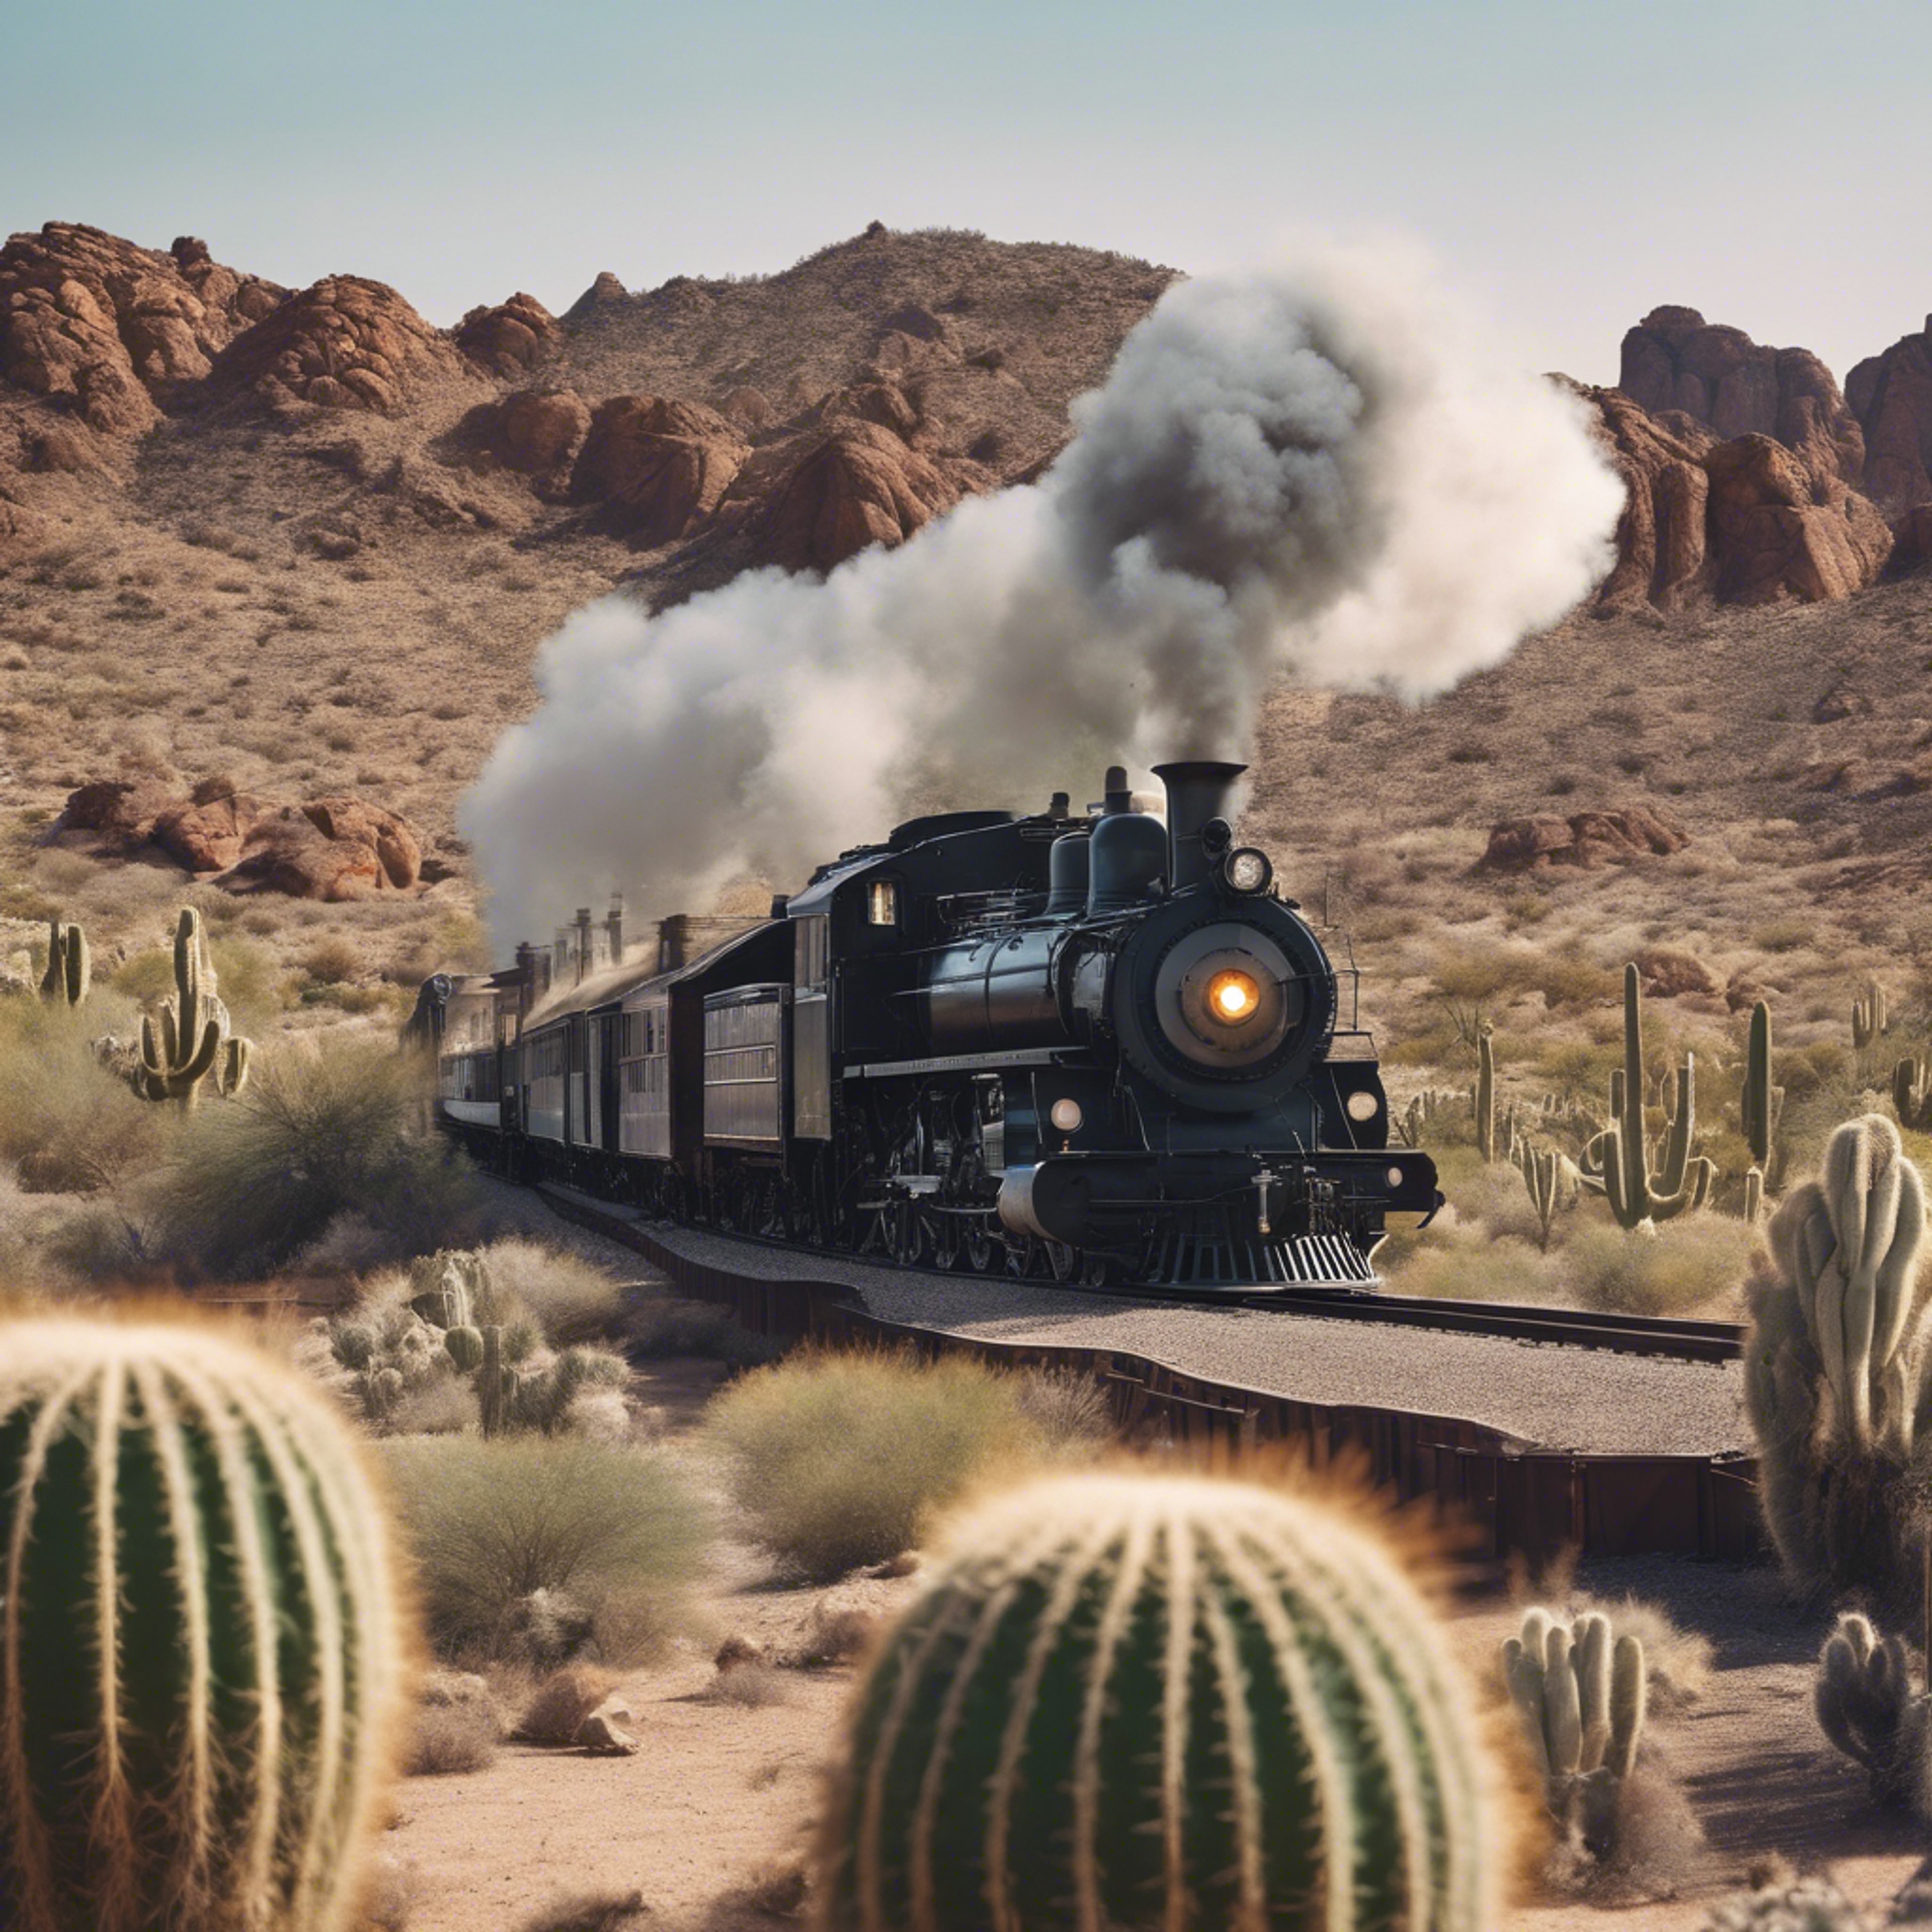 A locomotive steam train rushing across the barren Western landscape surrounded by towering cacti. Обои[f5a4930d44454dd795f5]